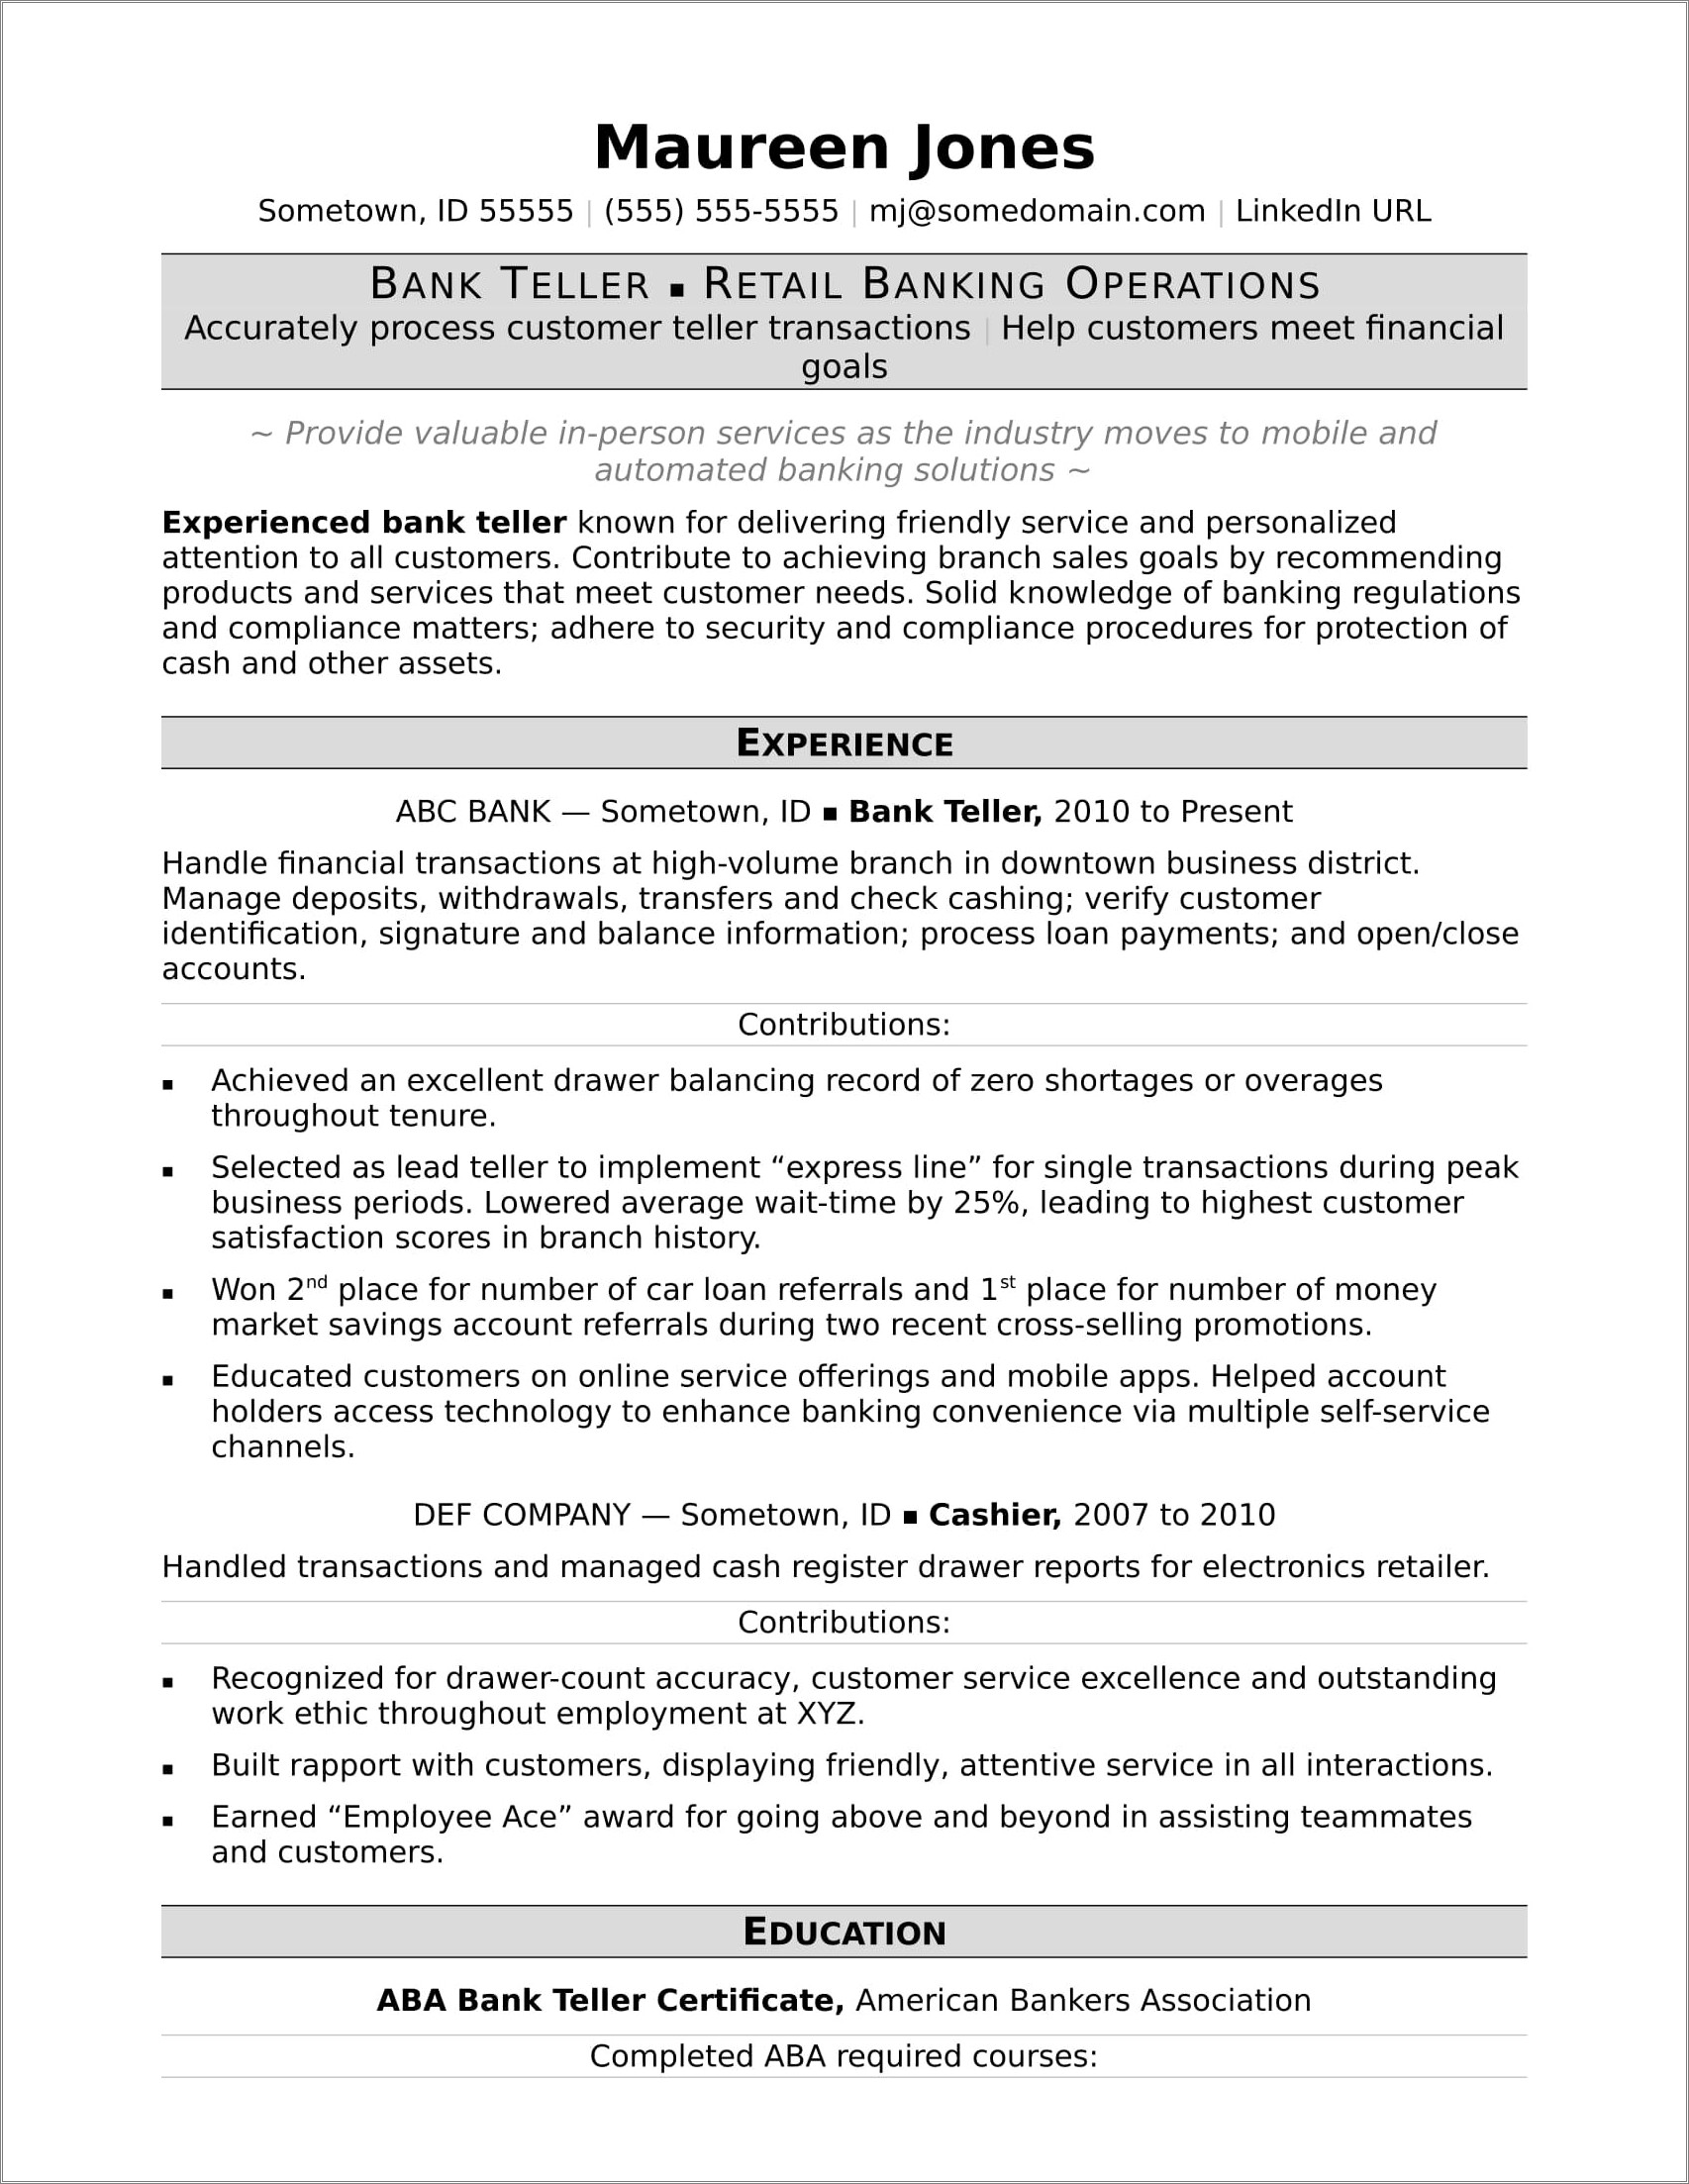 Credit Union Branch Manager Resume Sample